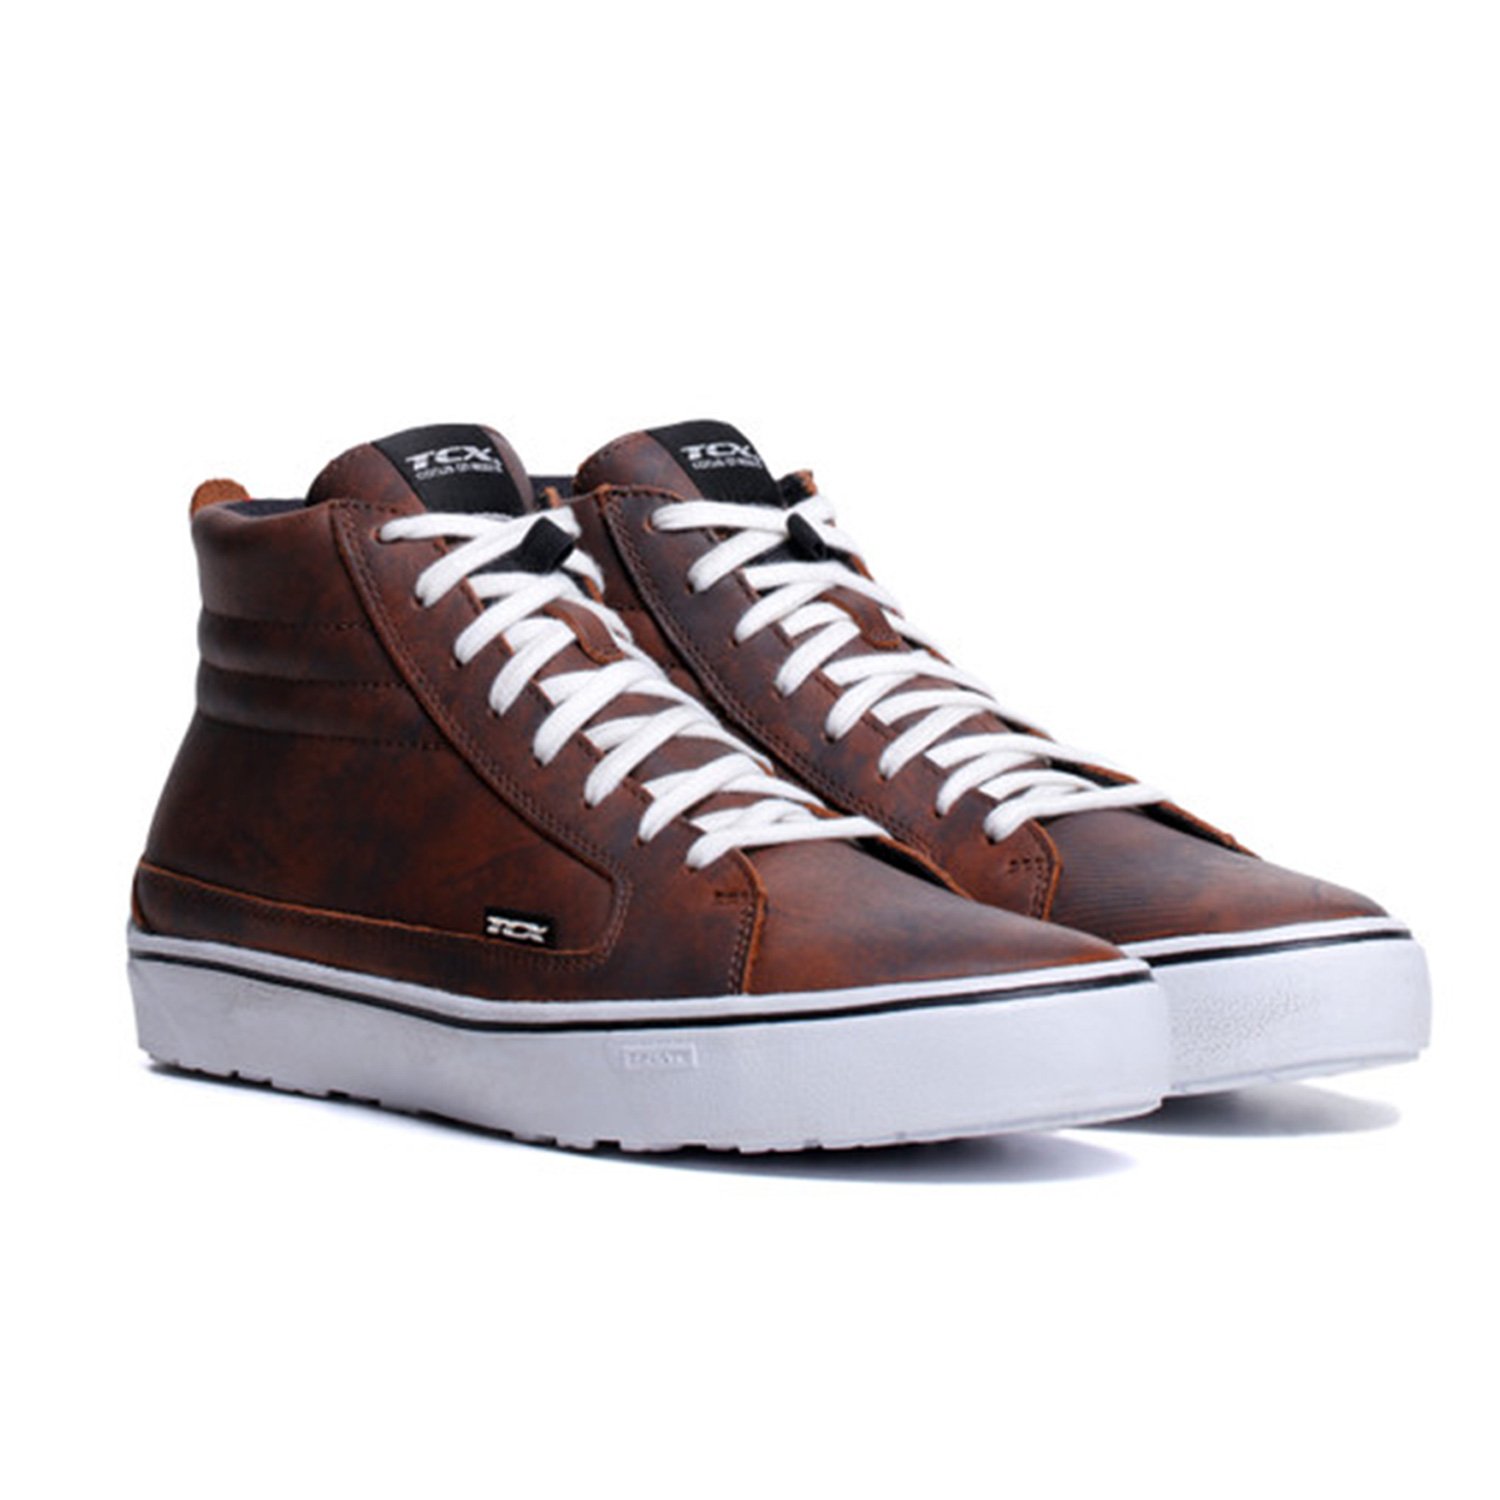 Image of TCX Street 3 WP Brown White Size 44 ID 8051019547873